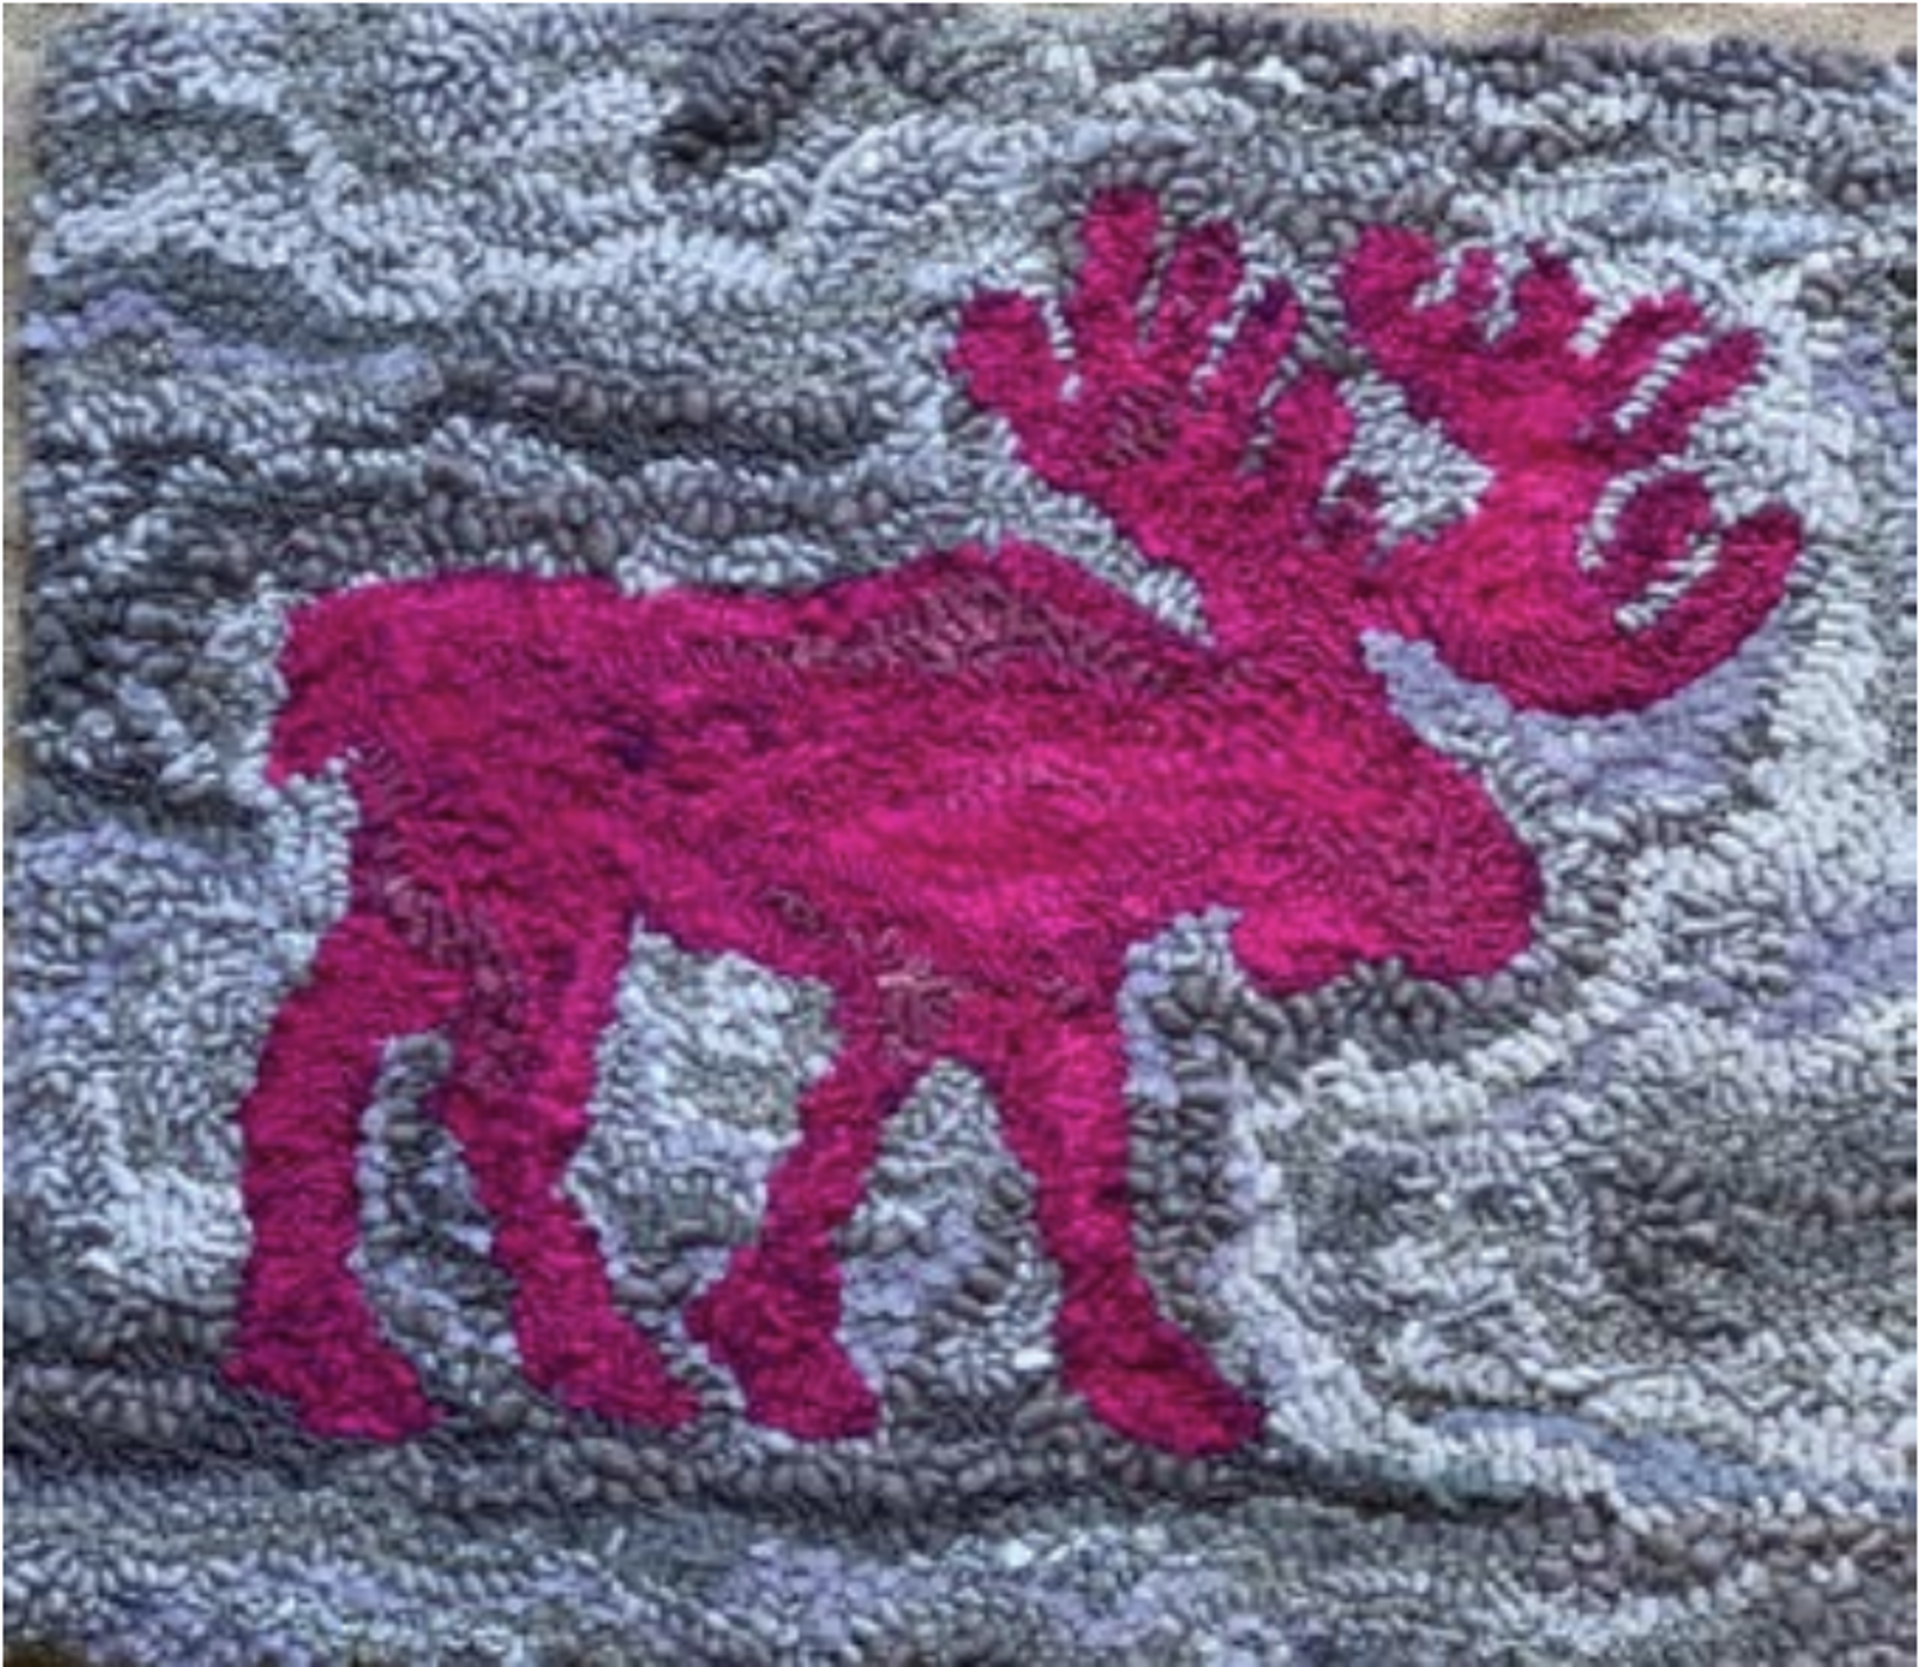 Pink Moose Pillow 2 by Linda Smith